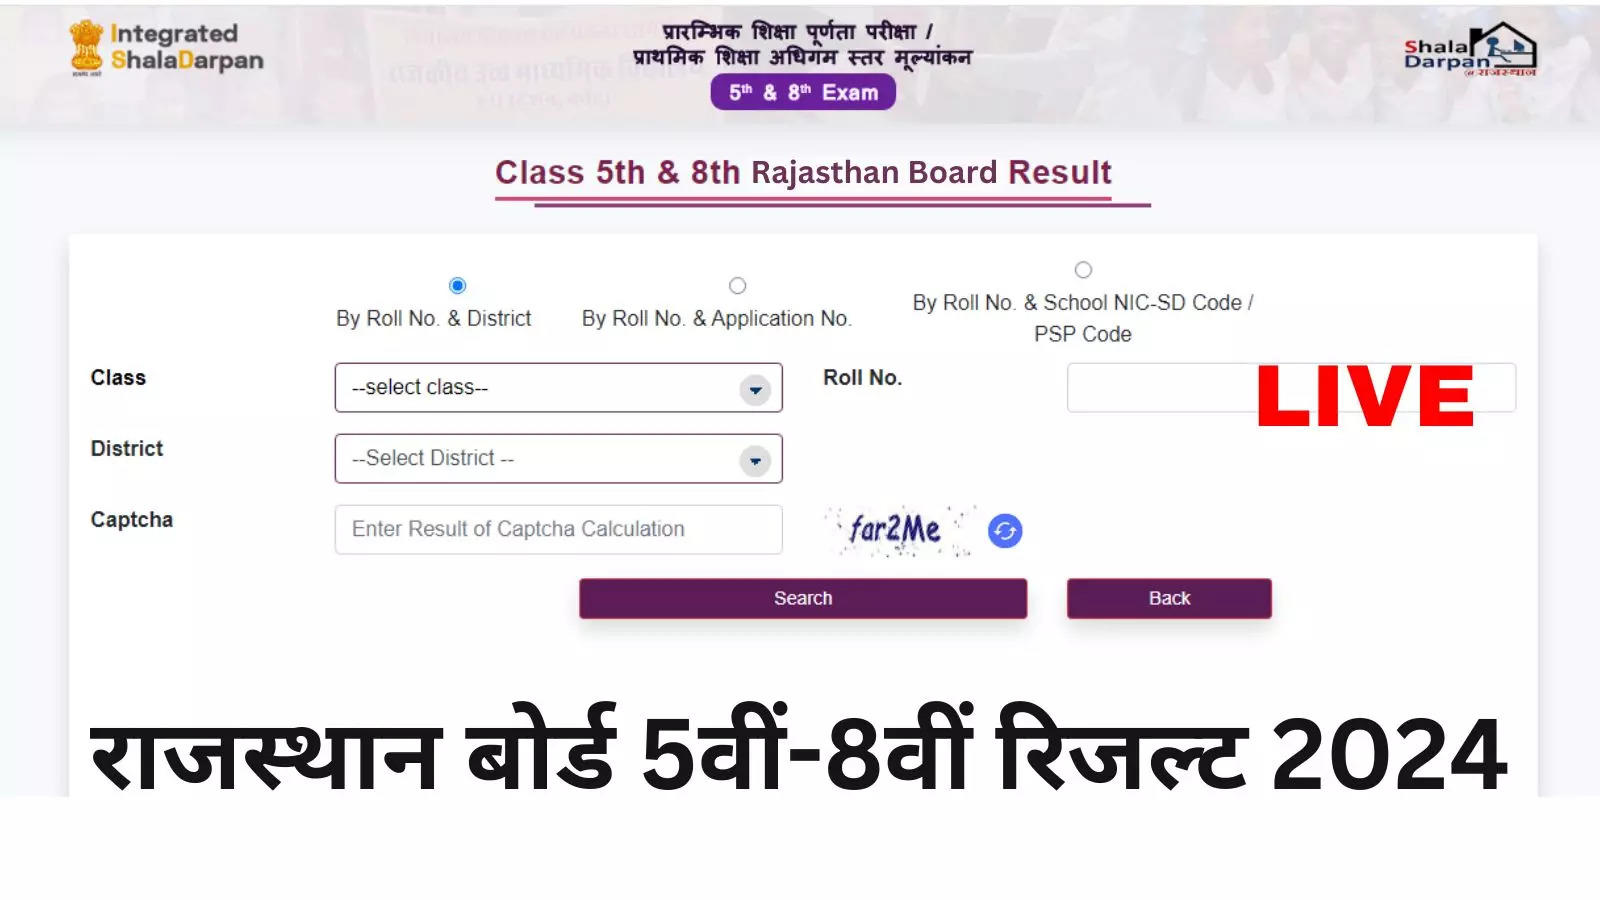 RBSE Class 5th, 8th Result 2024 LIVE: How to Check Rajasthan Board 5th, 8th Result